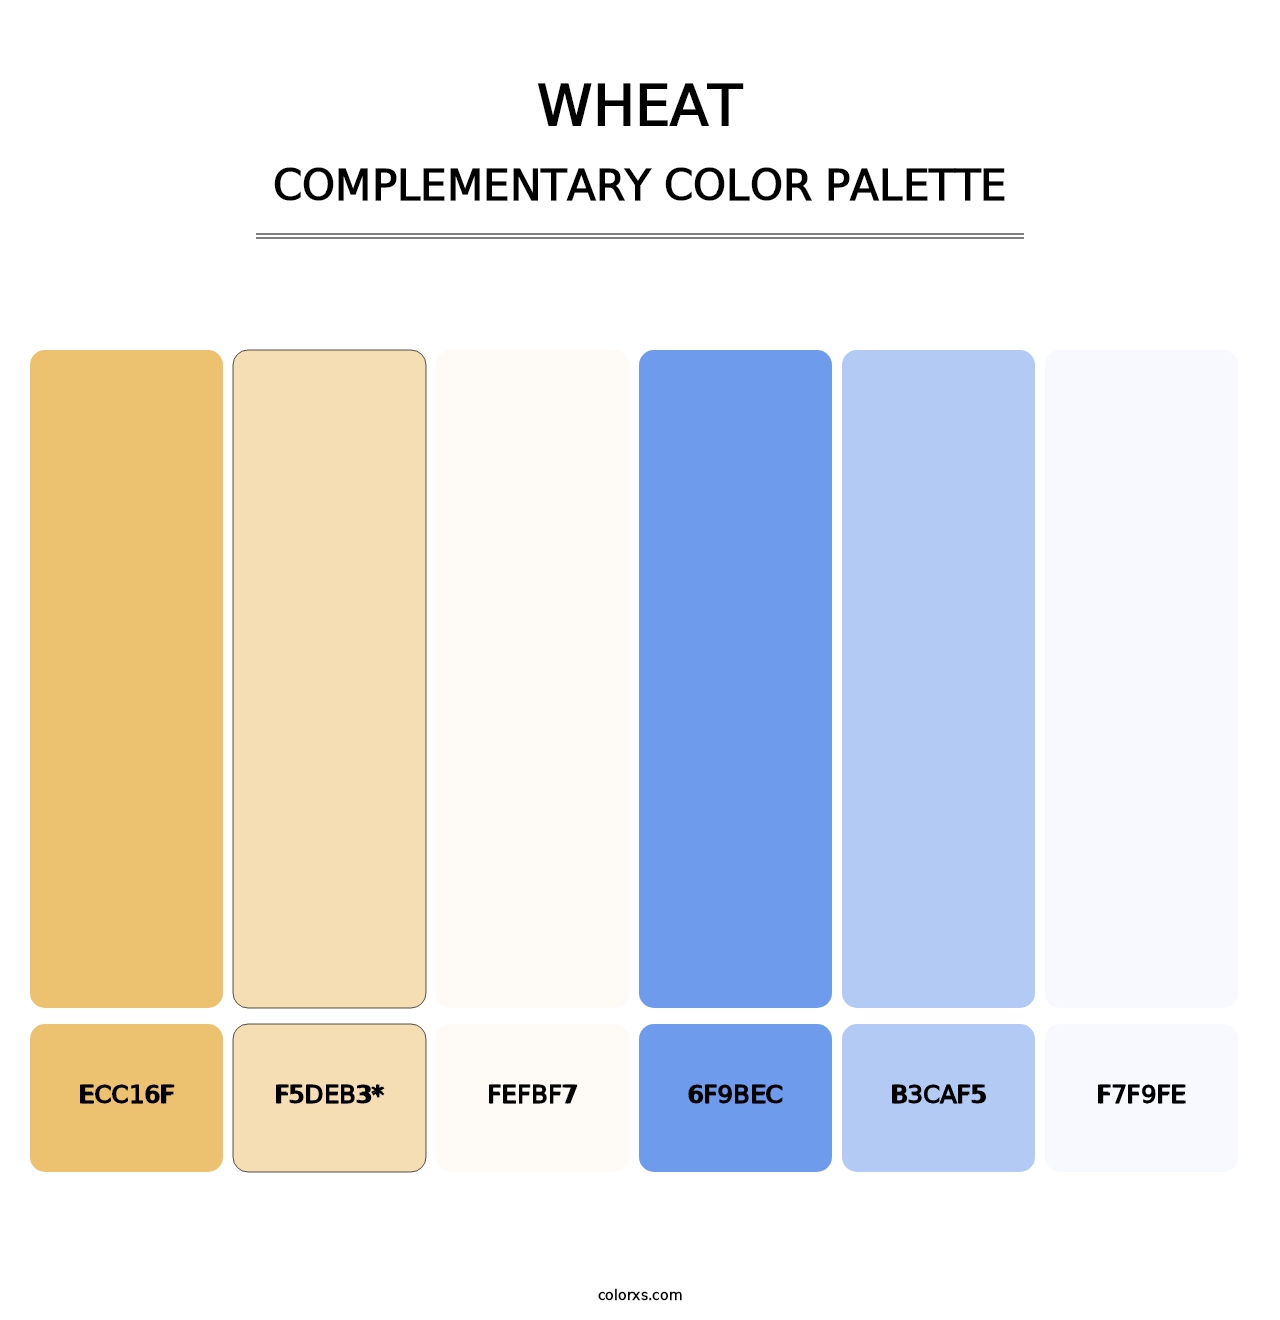 Wheat - Complementary Color Palette